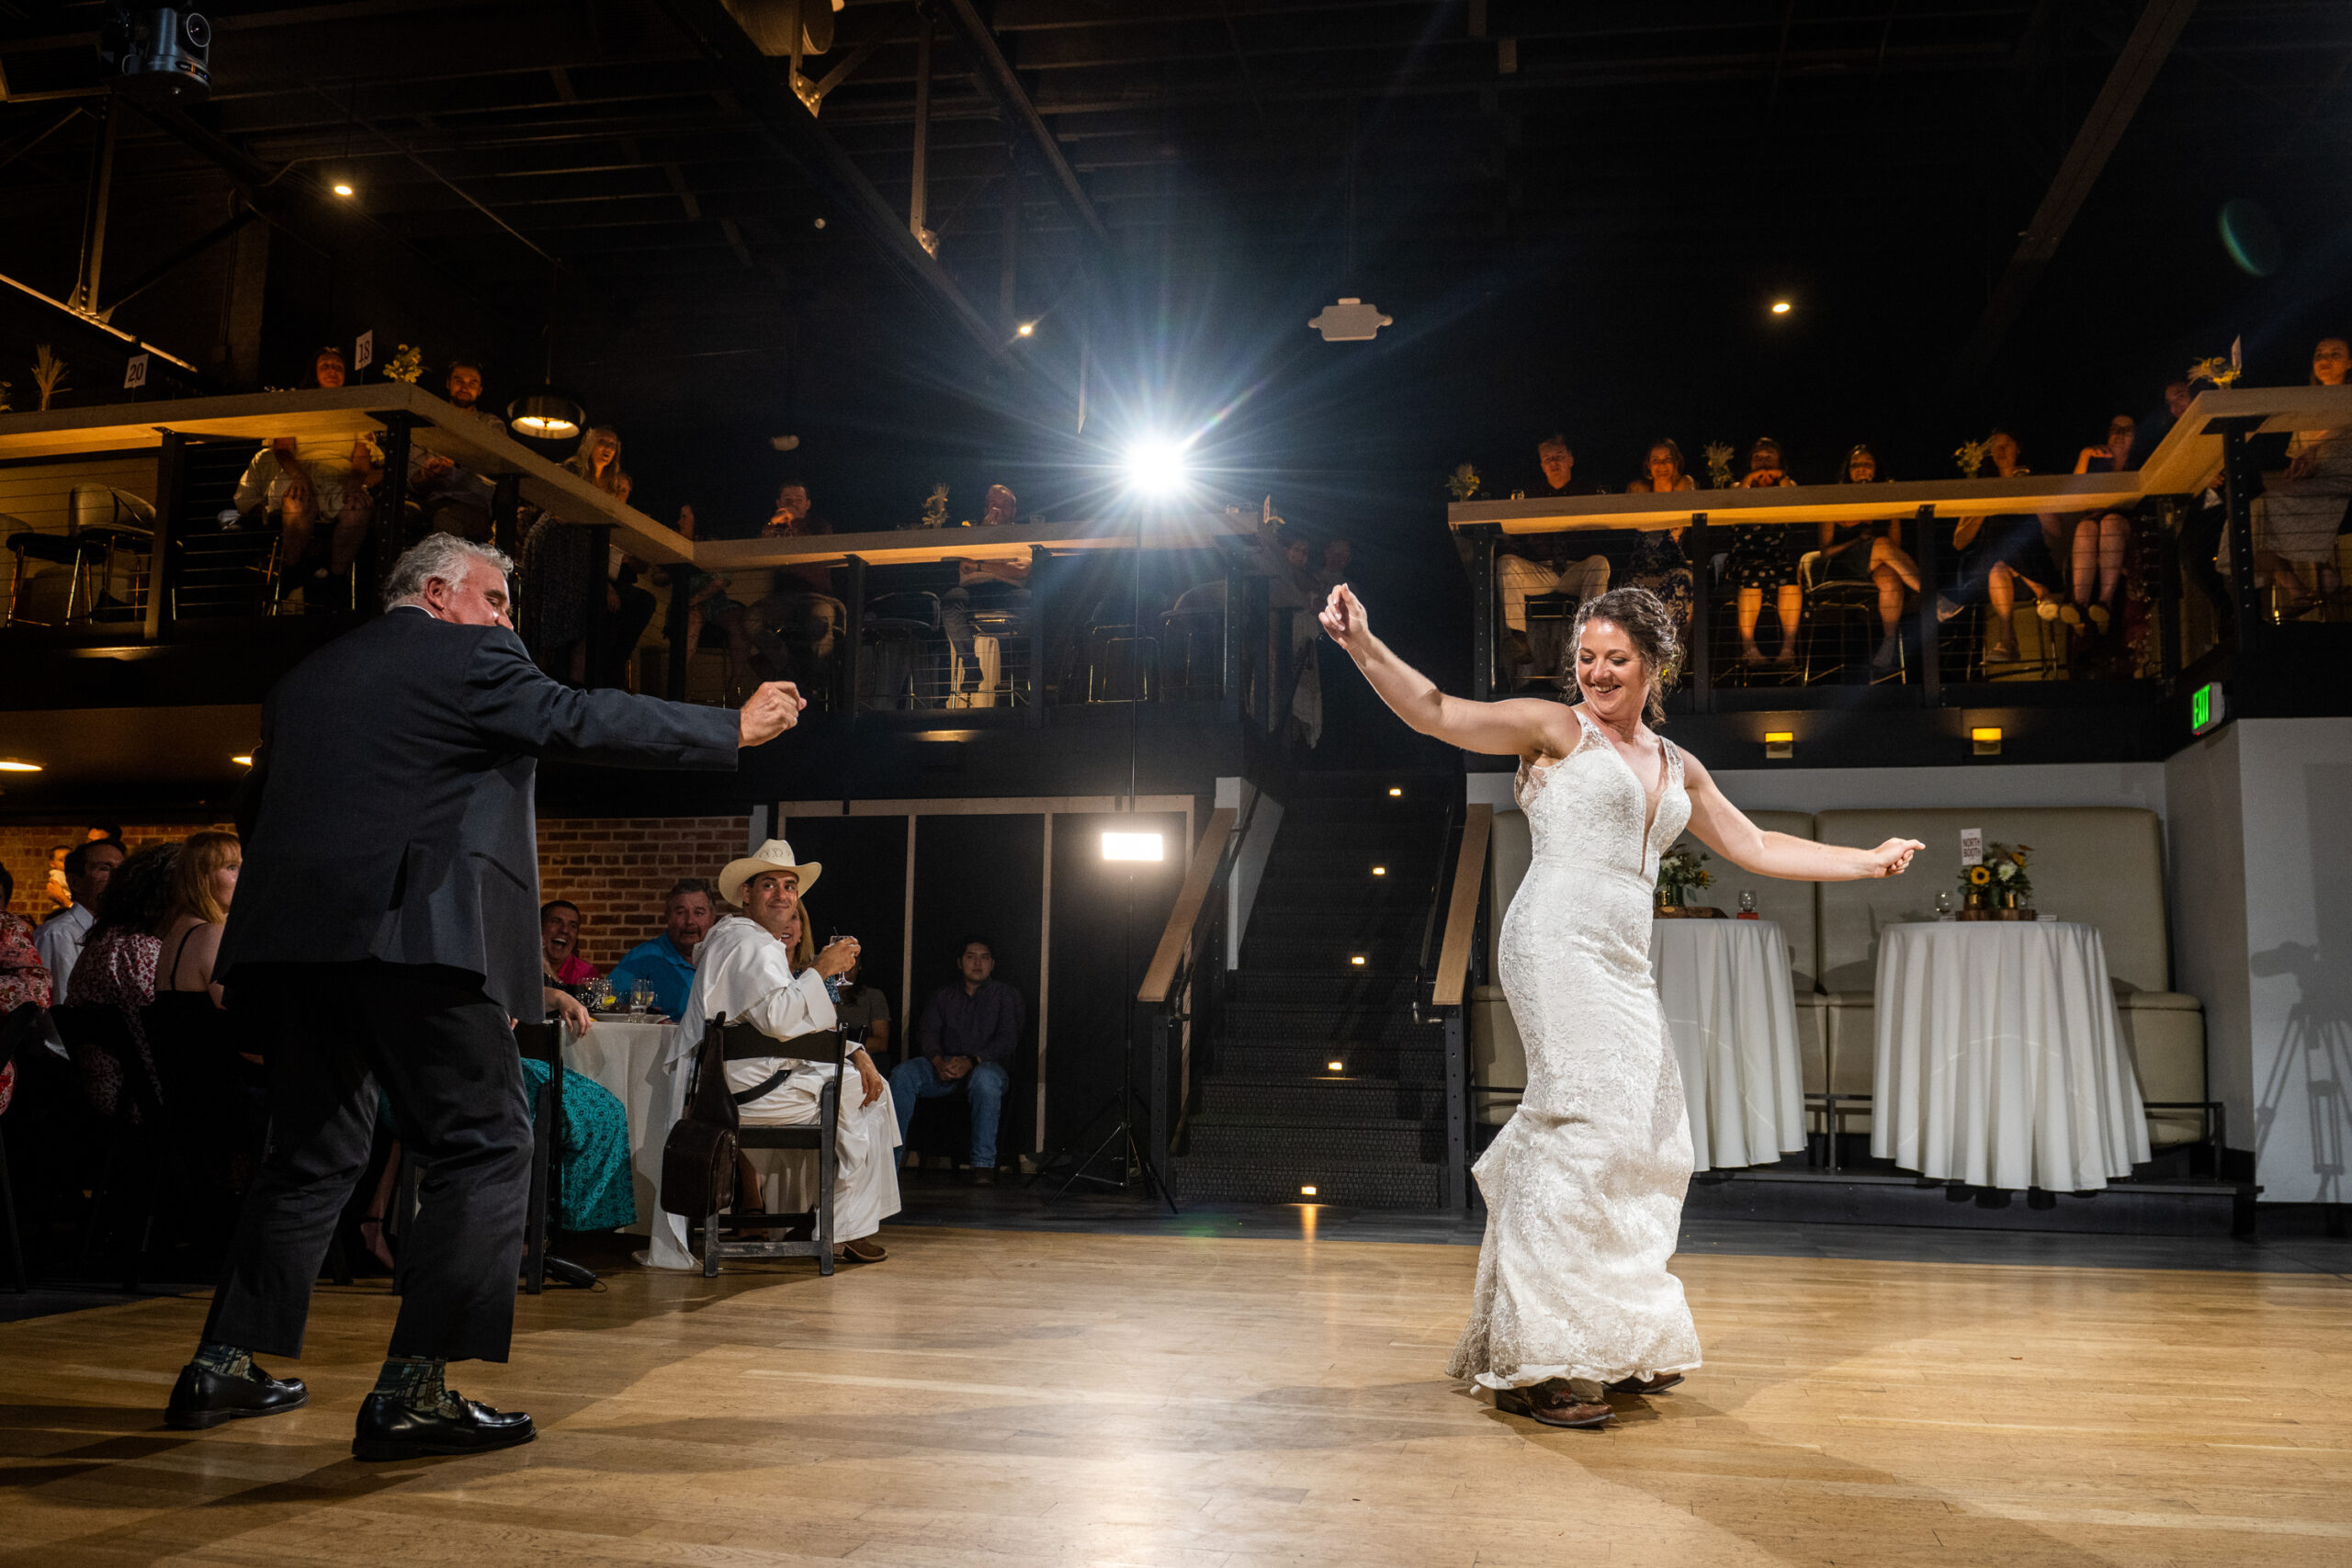 A bride and her father perform their first dance during a wedding reception at the Rose Event Center in Golden, Colorado.